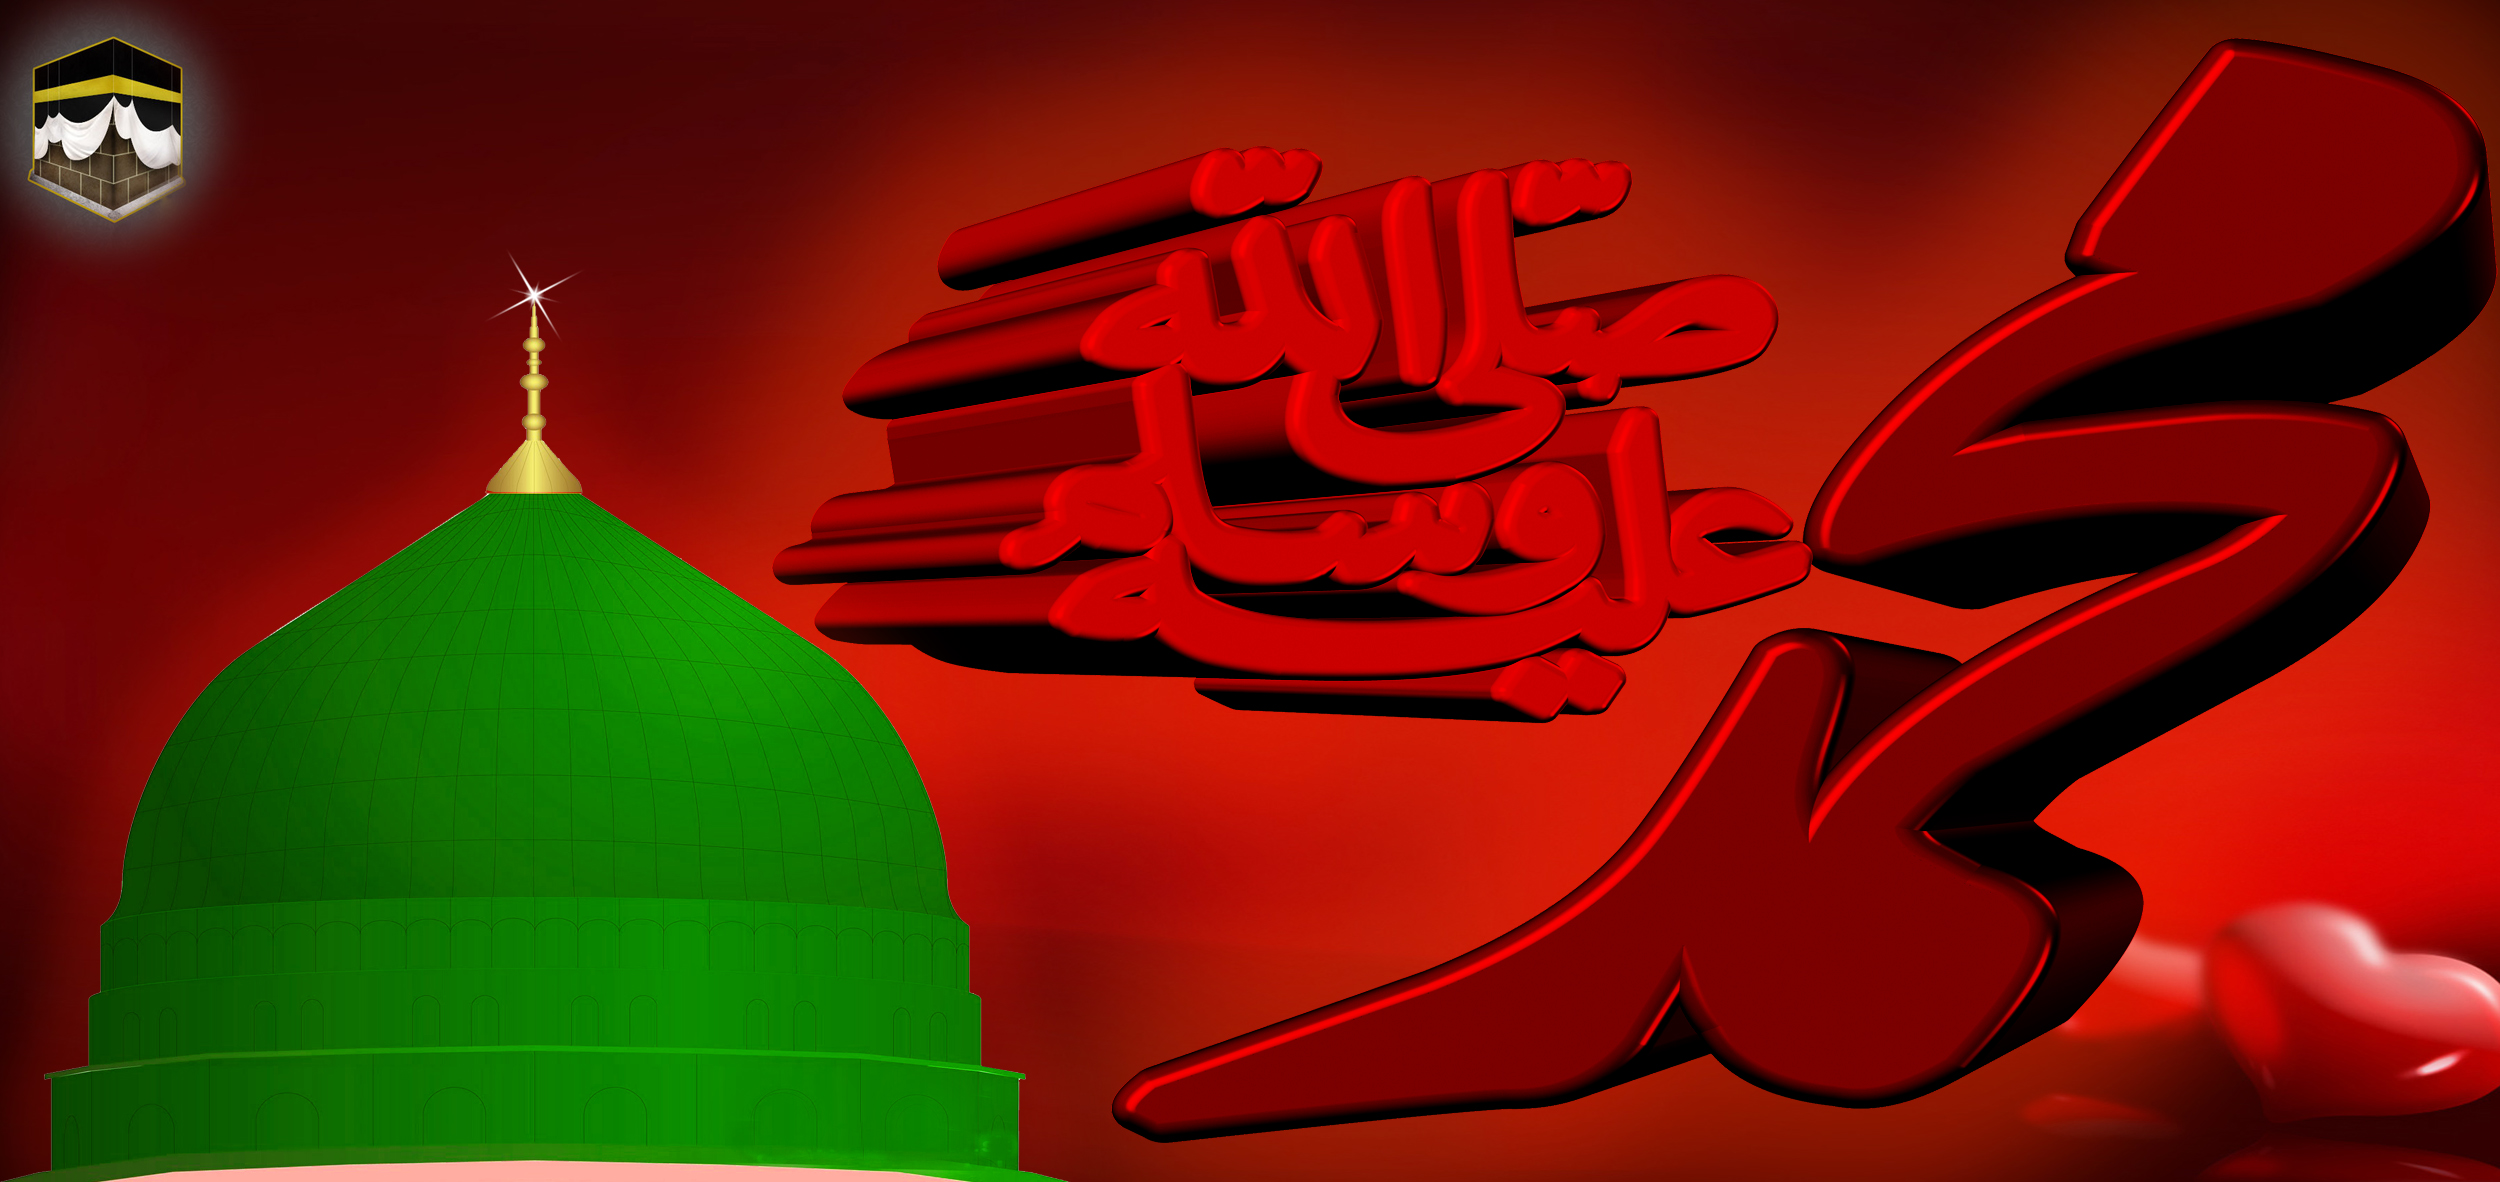 How to set Red and Green Islamic Wallpaper wallpaper on your desktop